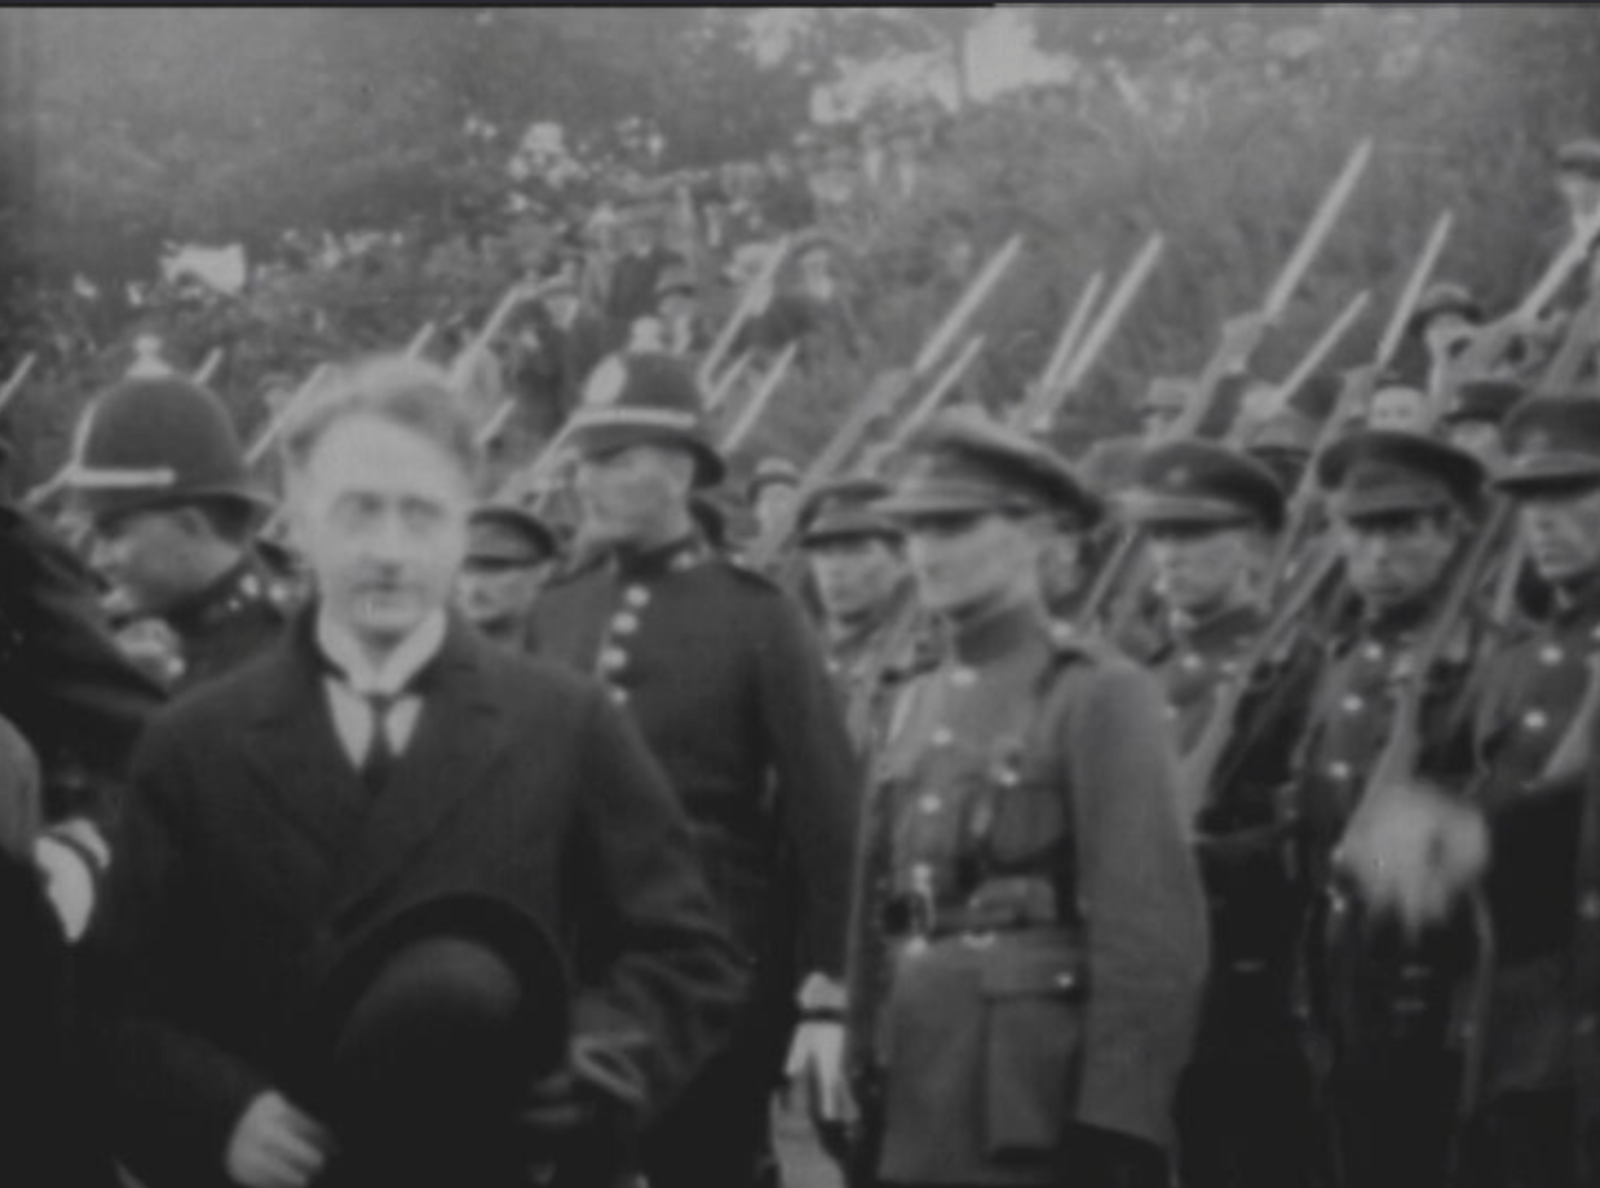 Image - A still from newsreel footage of WT Cosgrave's return to Ireland from Geneva (Credit: Reuters)